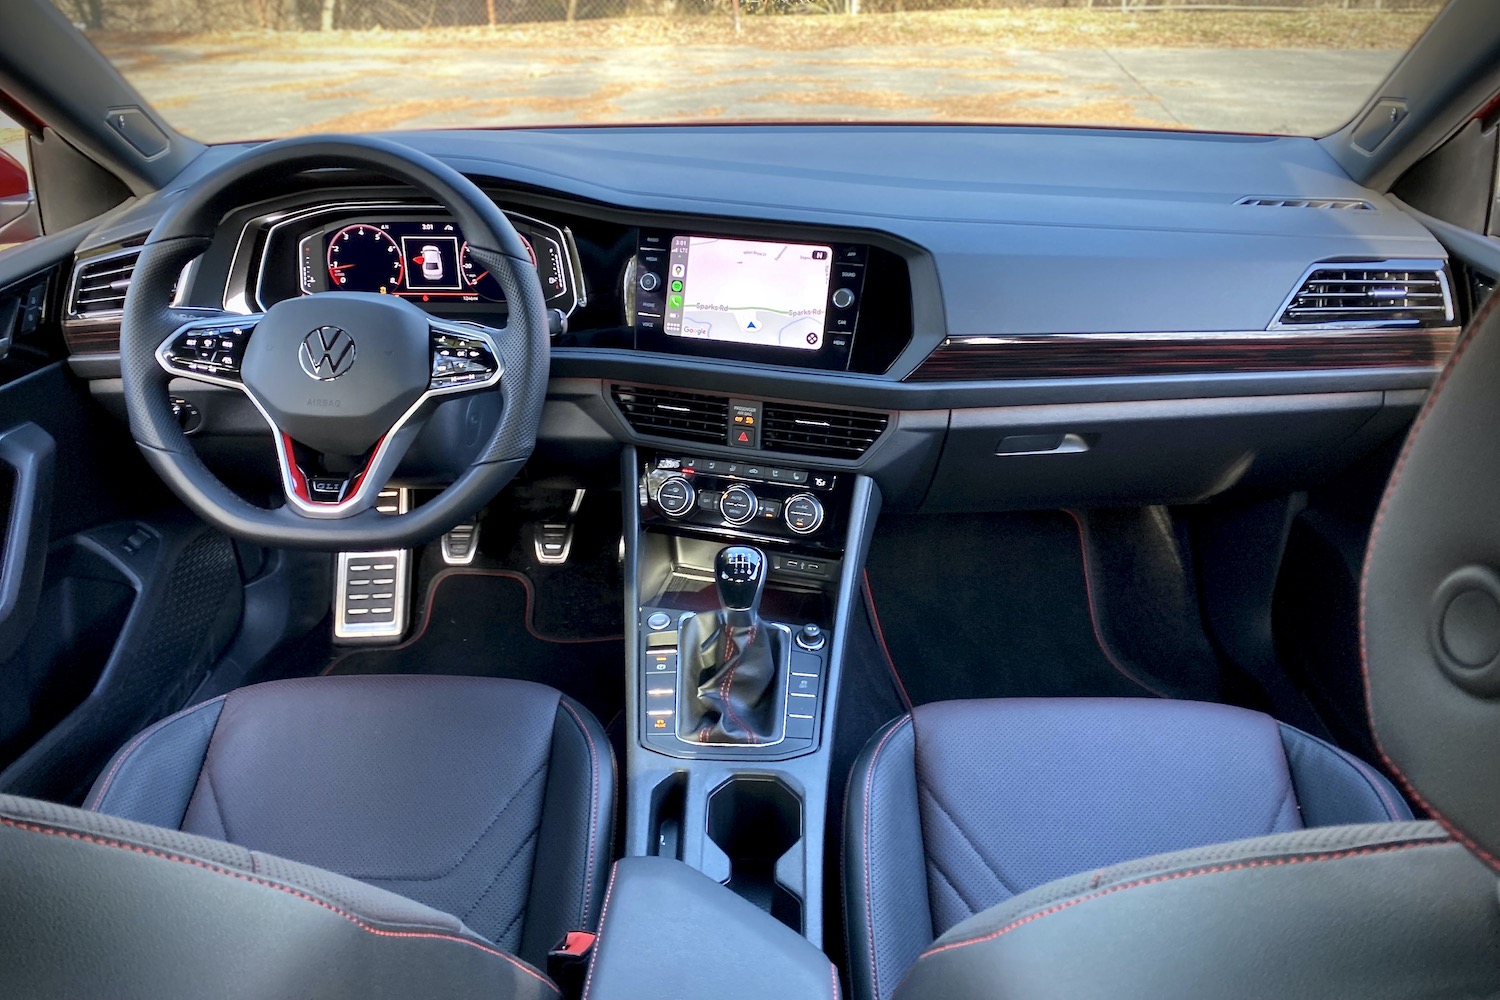 Dashboard and center console in the 2022 Volkswagen Jetta GLI from the rear seats.